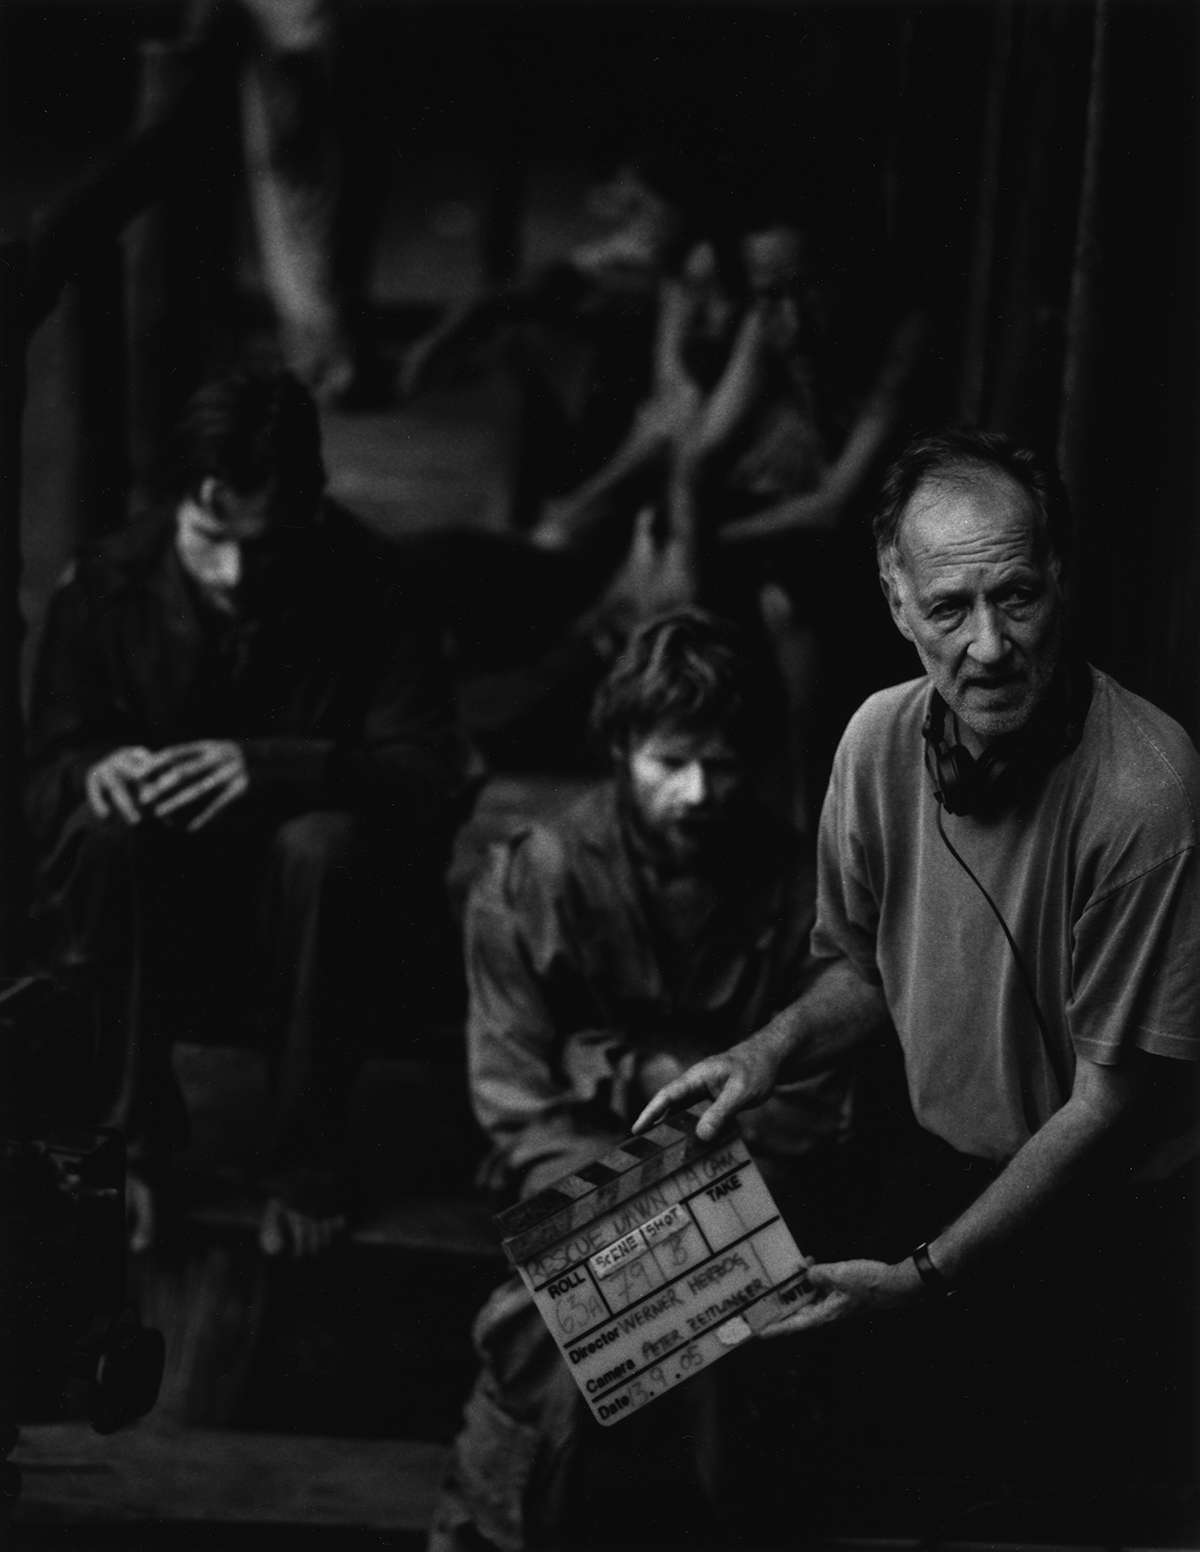 Black and white photo: In the foreground the director with director's hatch, in the background (blurred) the actors are sitting.